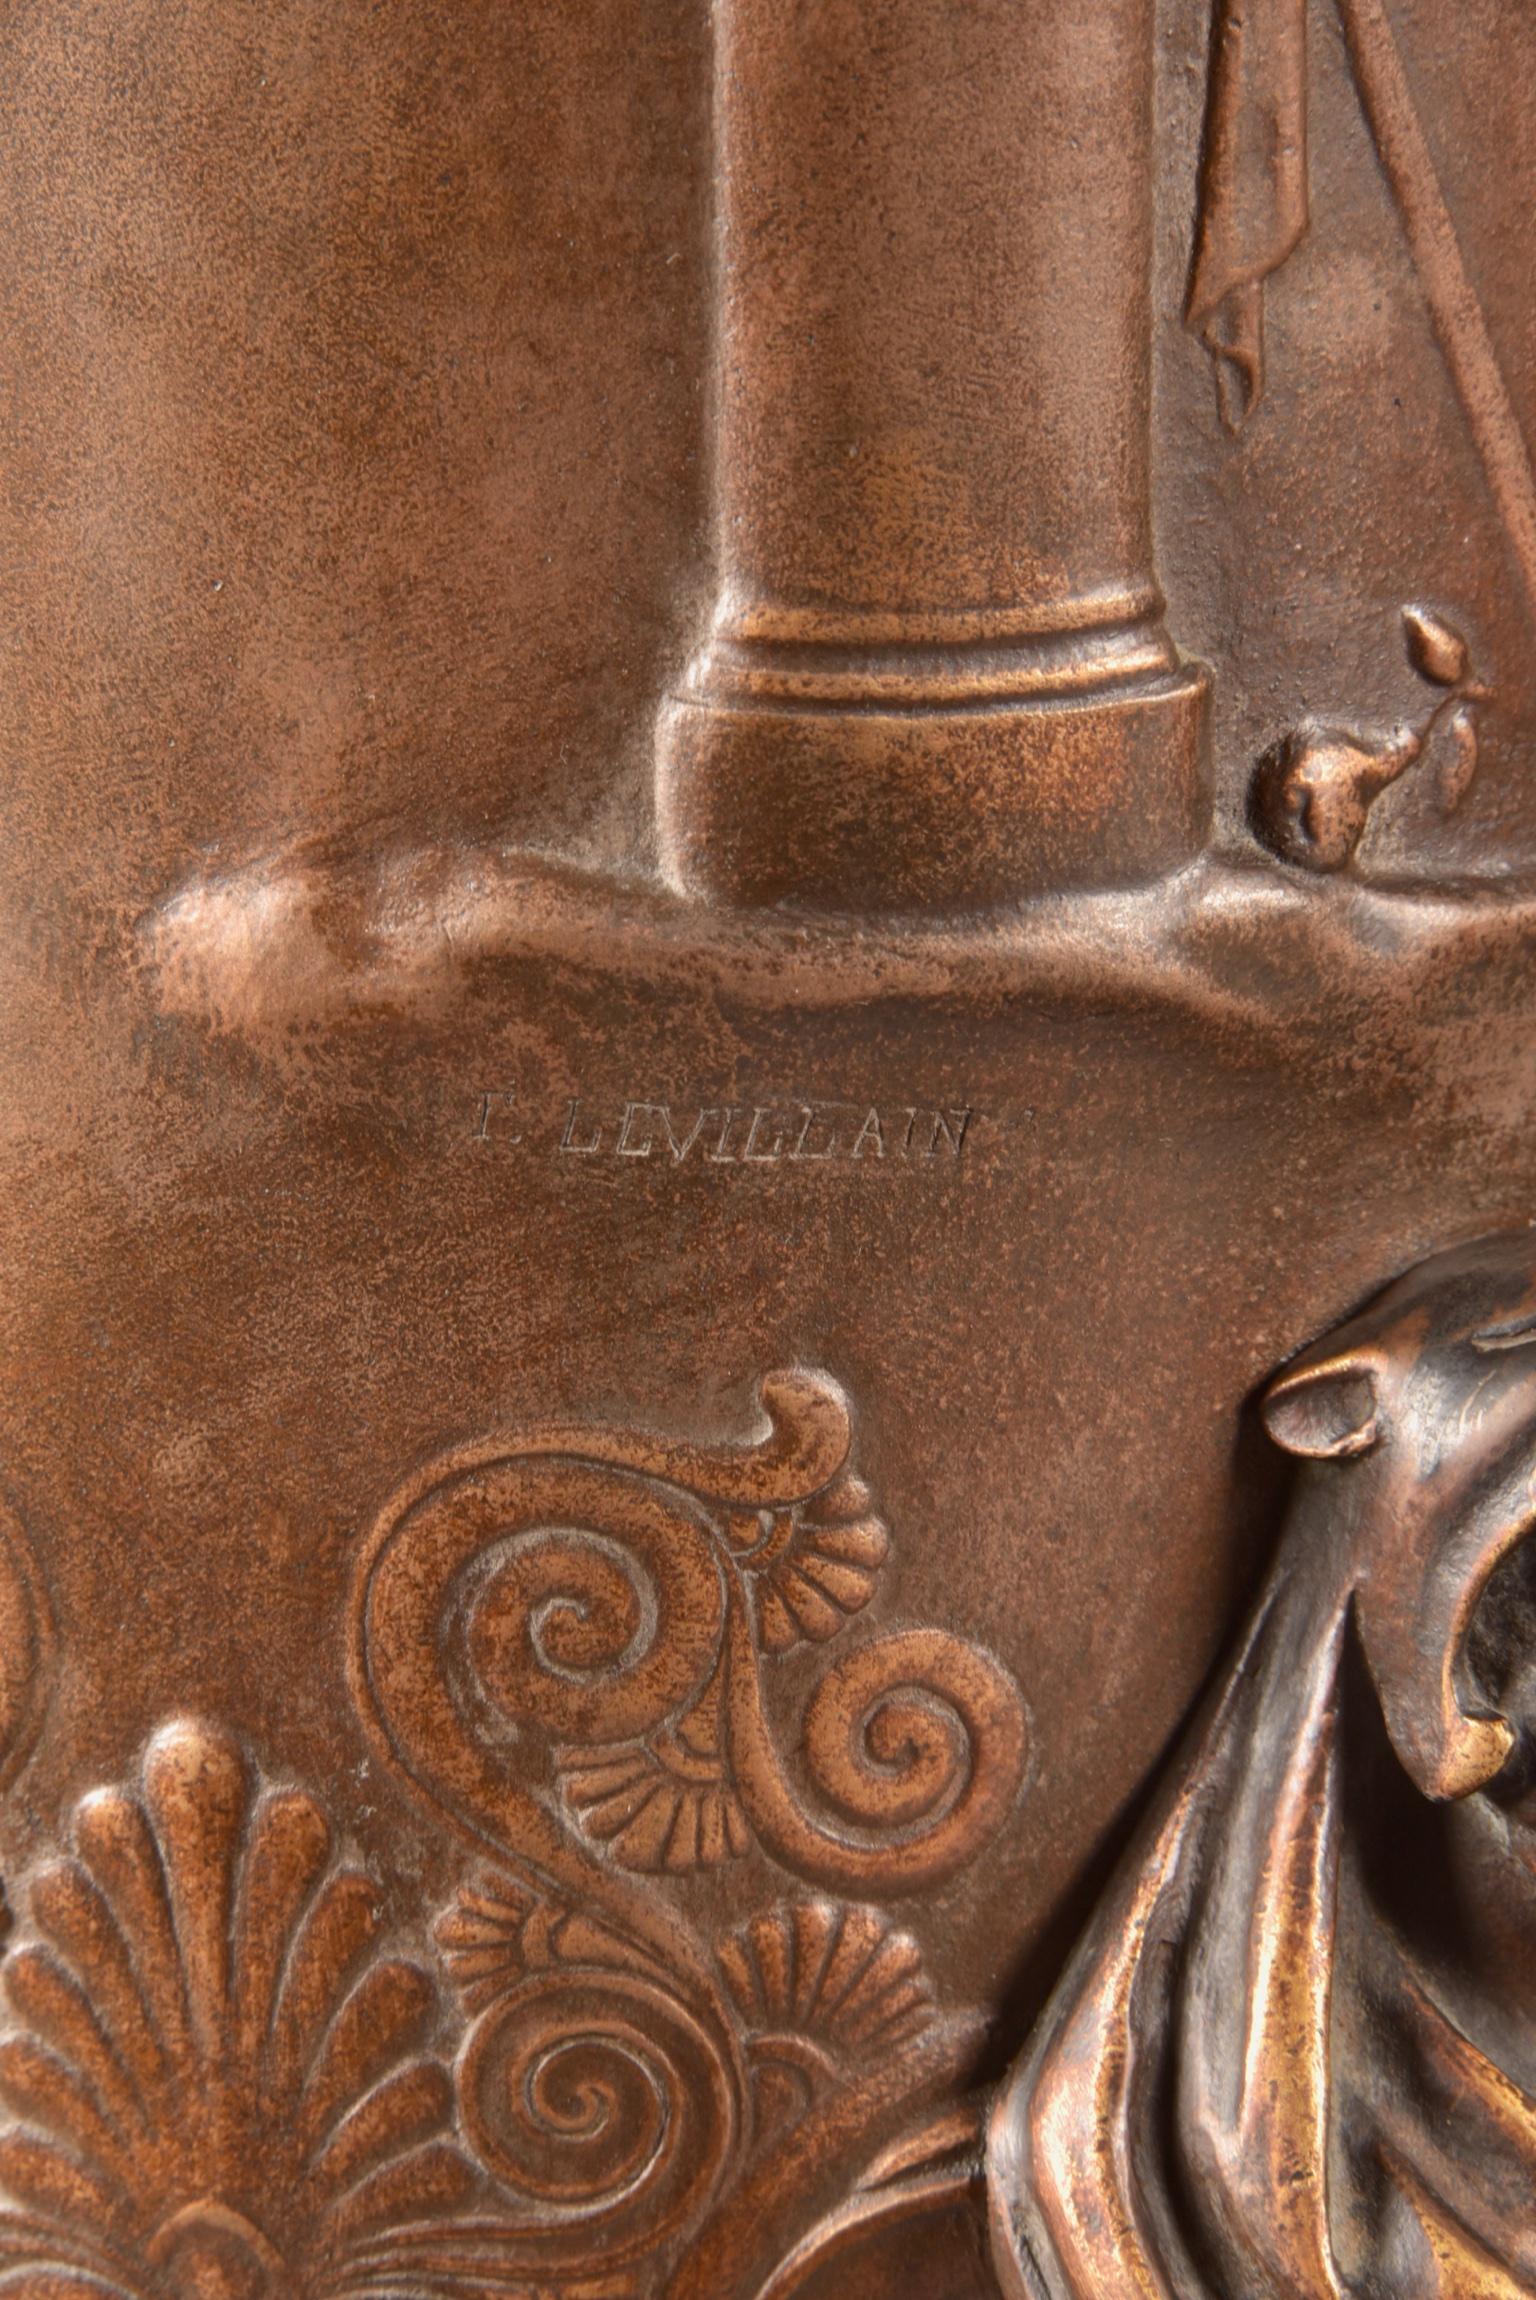 F. Levillain (1837-1905), F. Barbedienne, Foundry, pair Large Neo-Greek Amphora For Sale 2